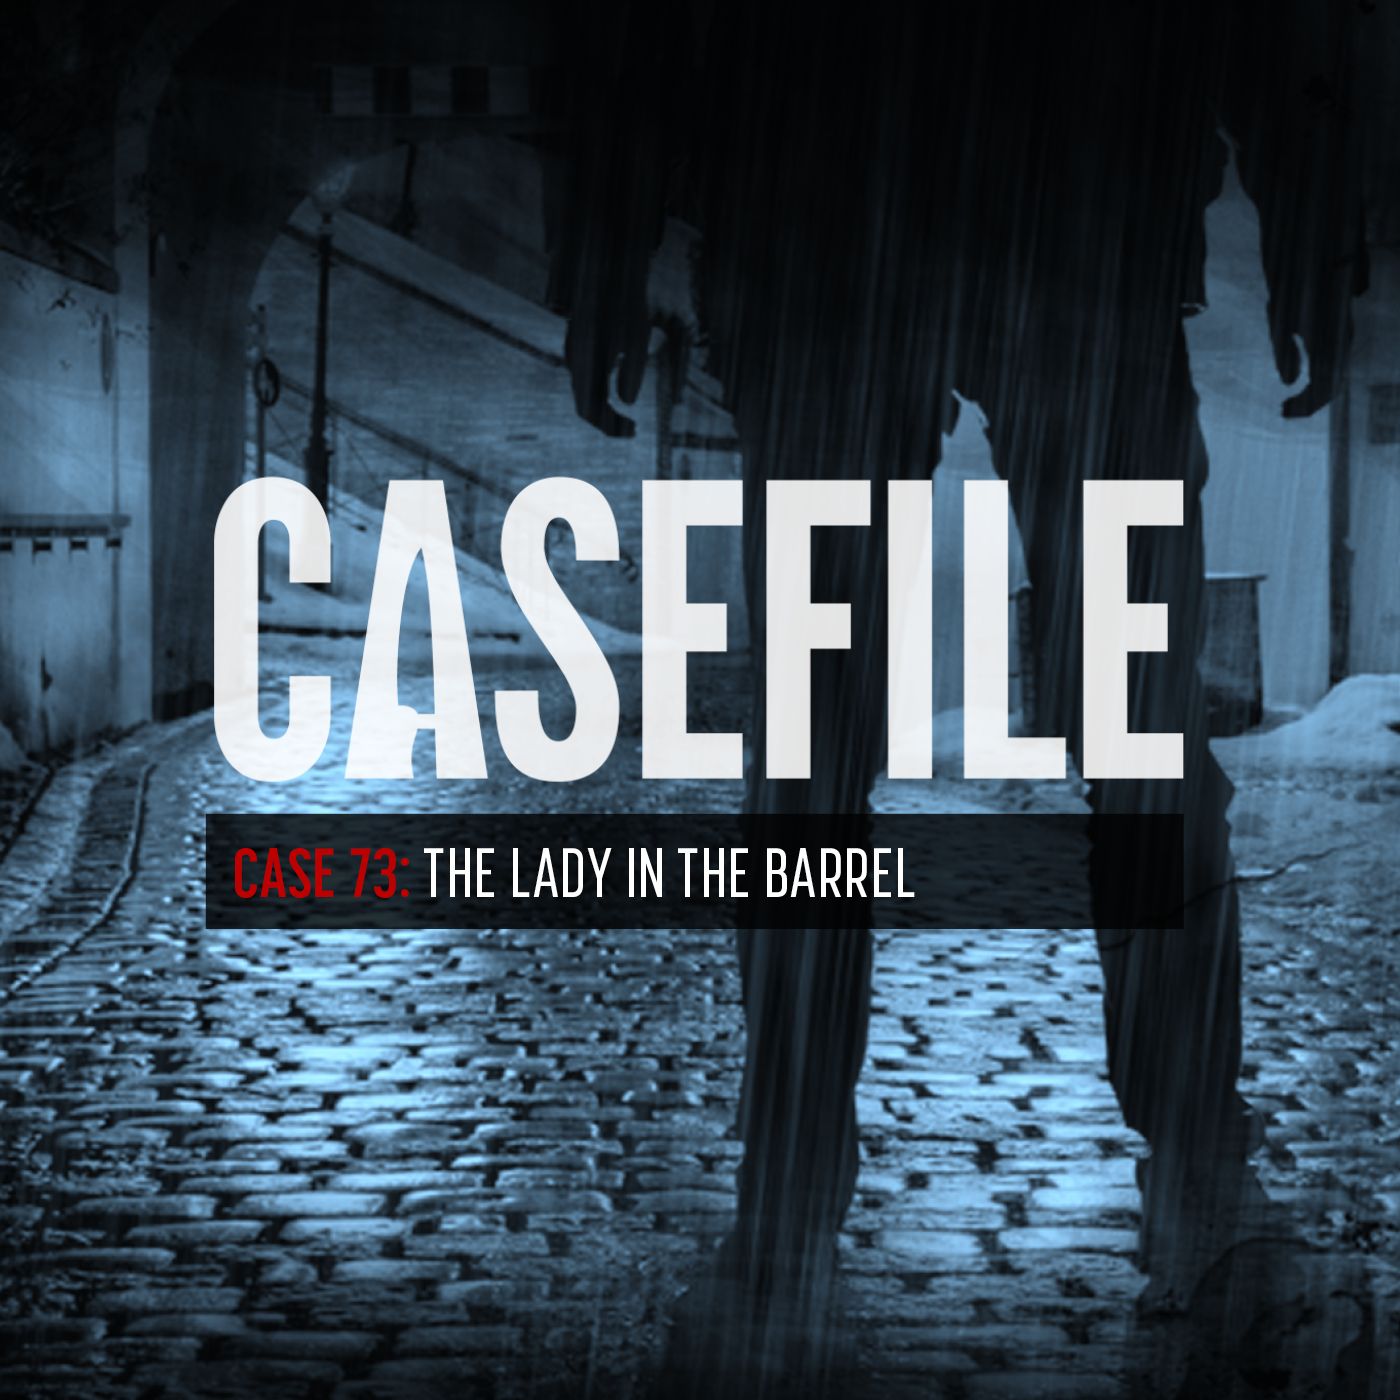 Case 73: The Lady in the Barrel